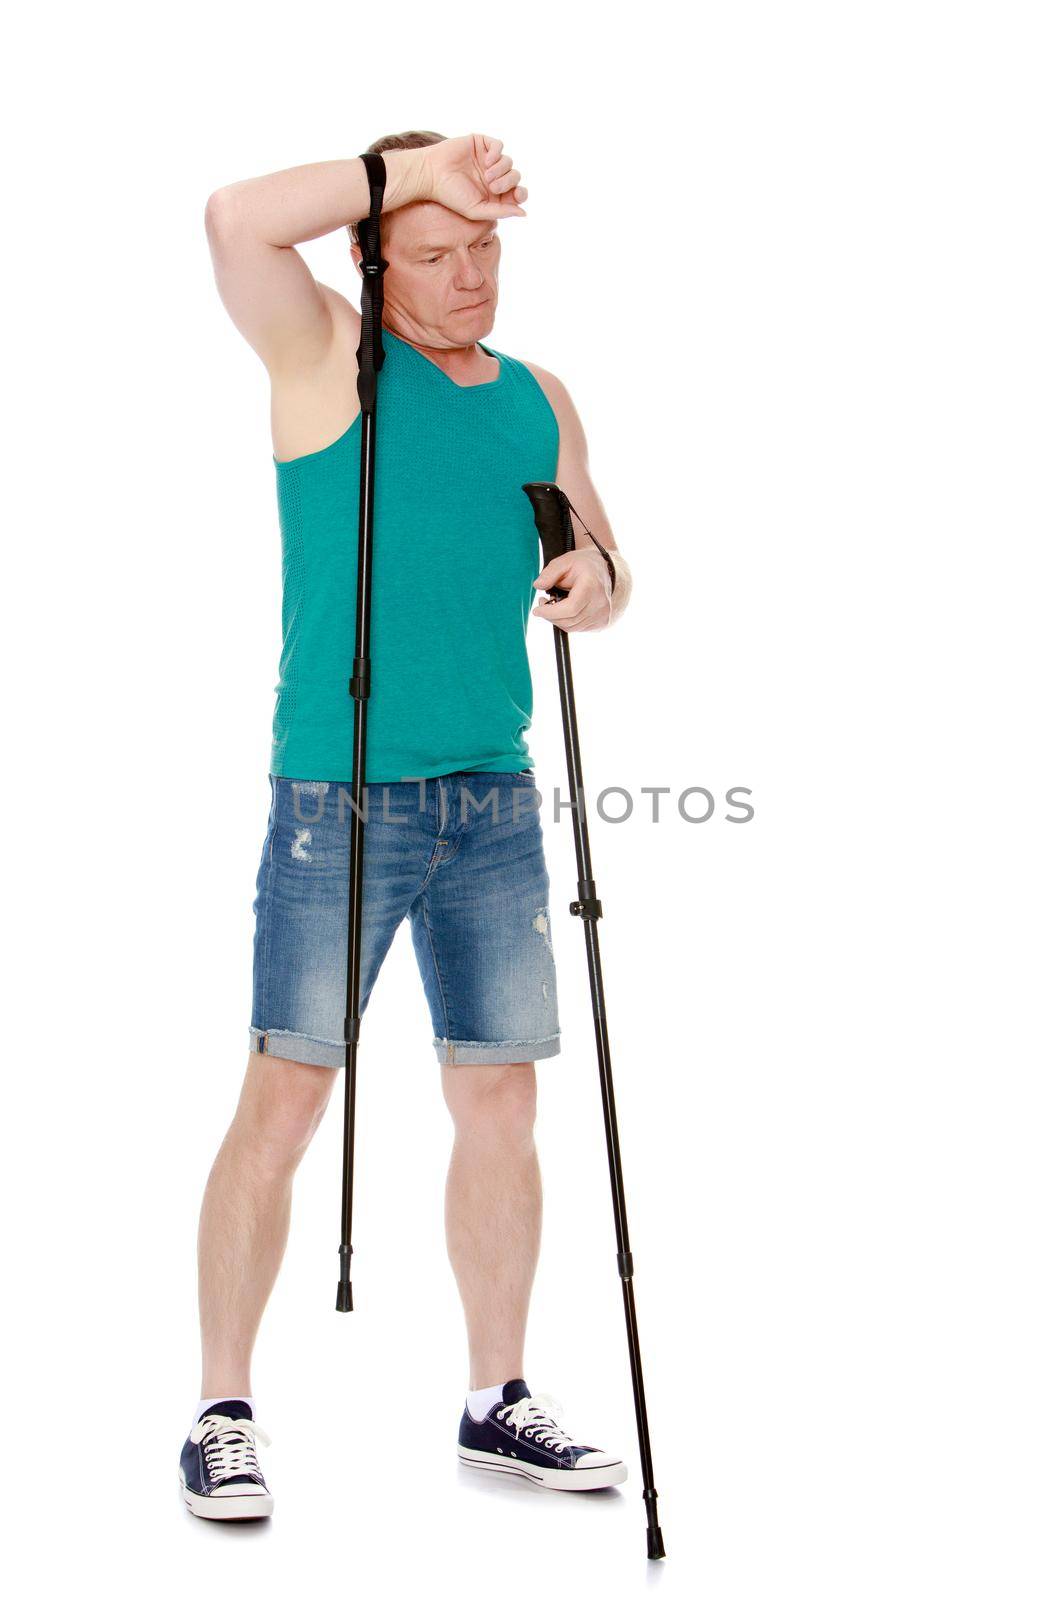 Man in t-shirt and shorts, Nordic walking sticks, hand wipes his sweat from his forehead -Isolated on white background